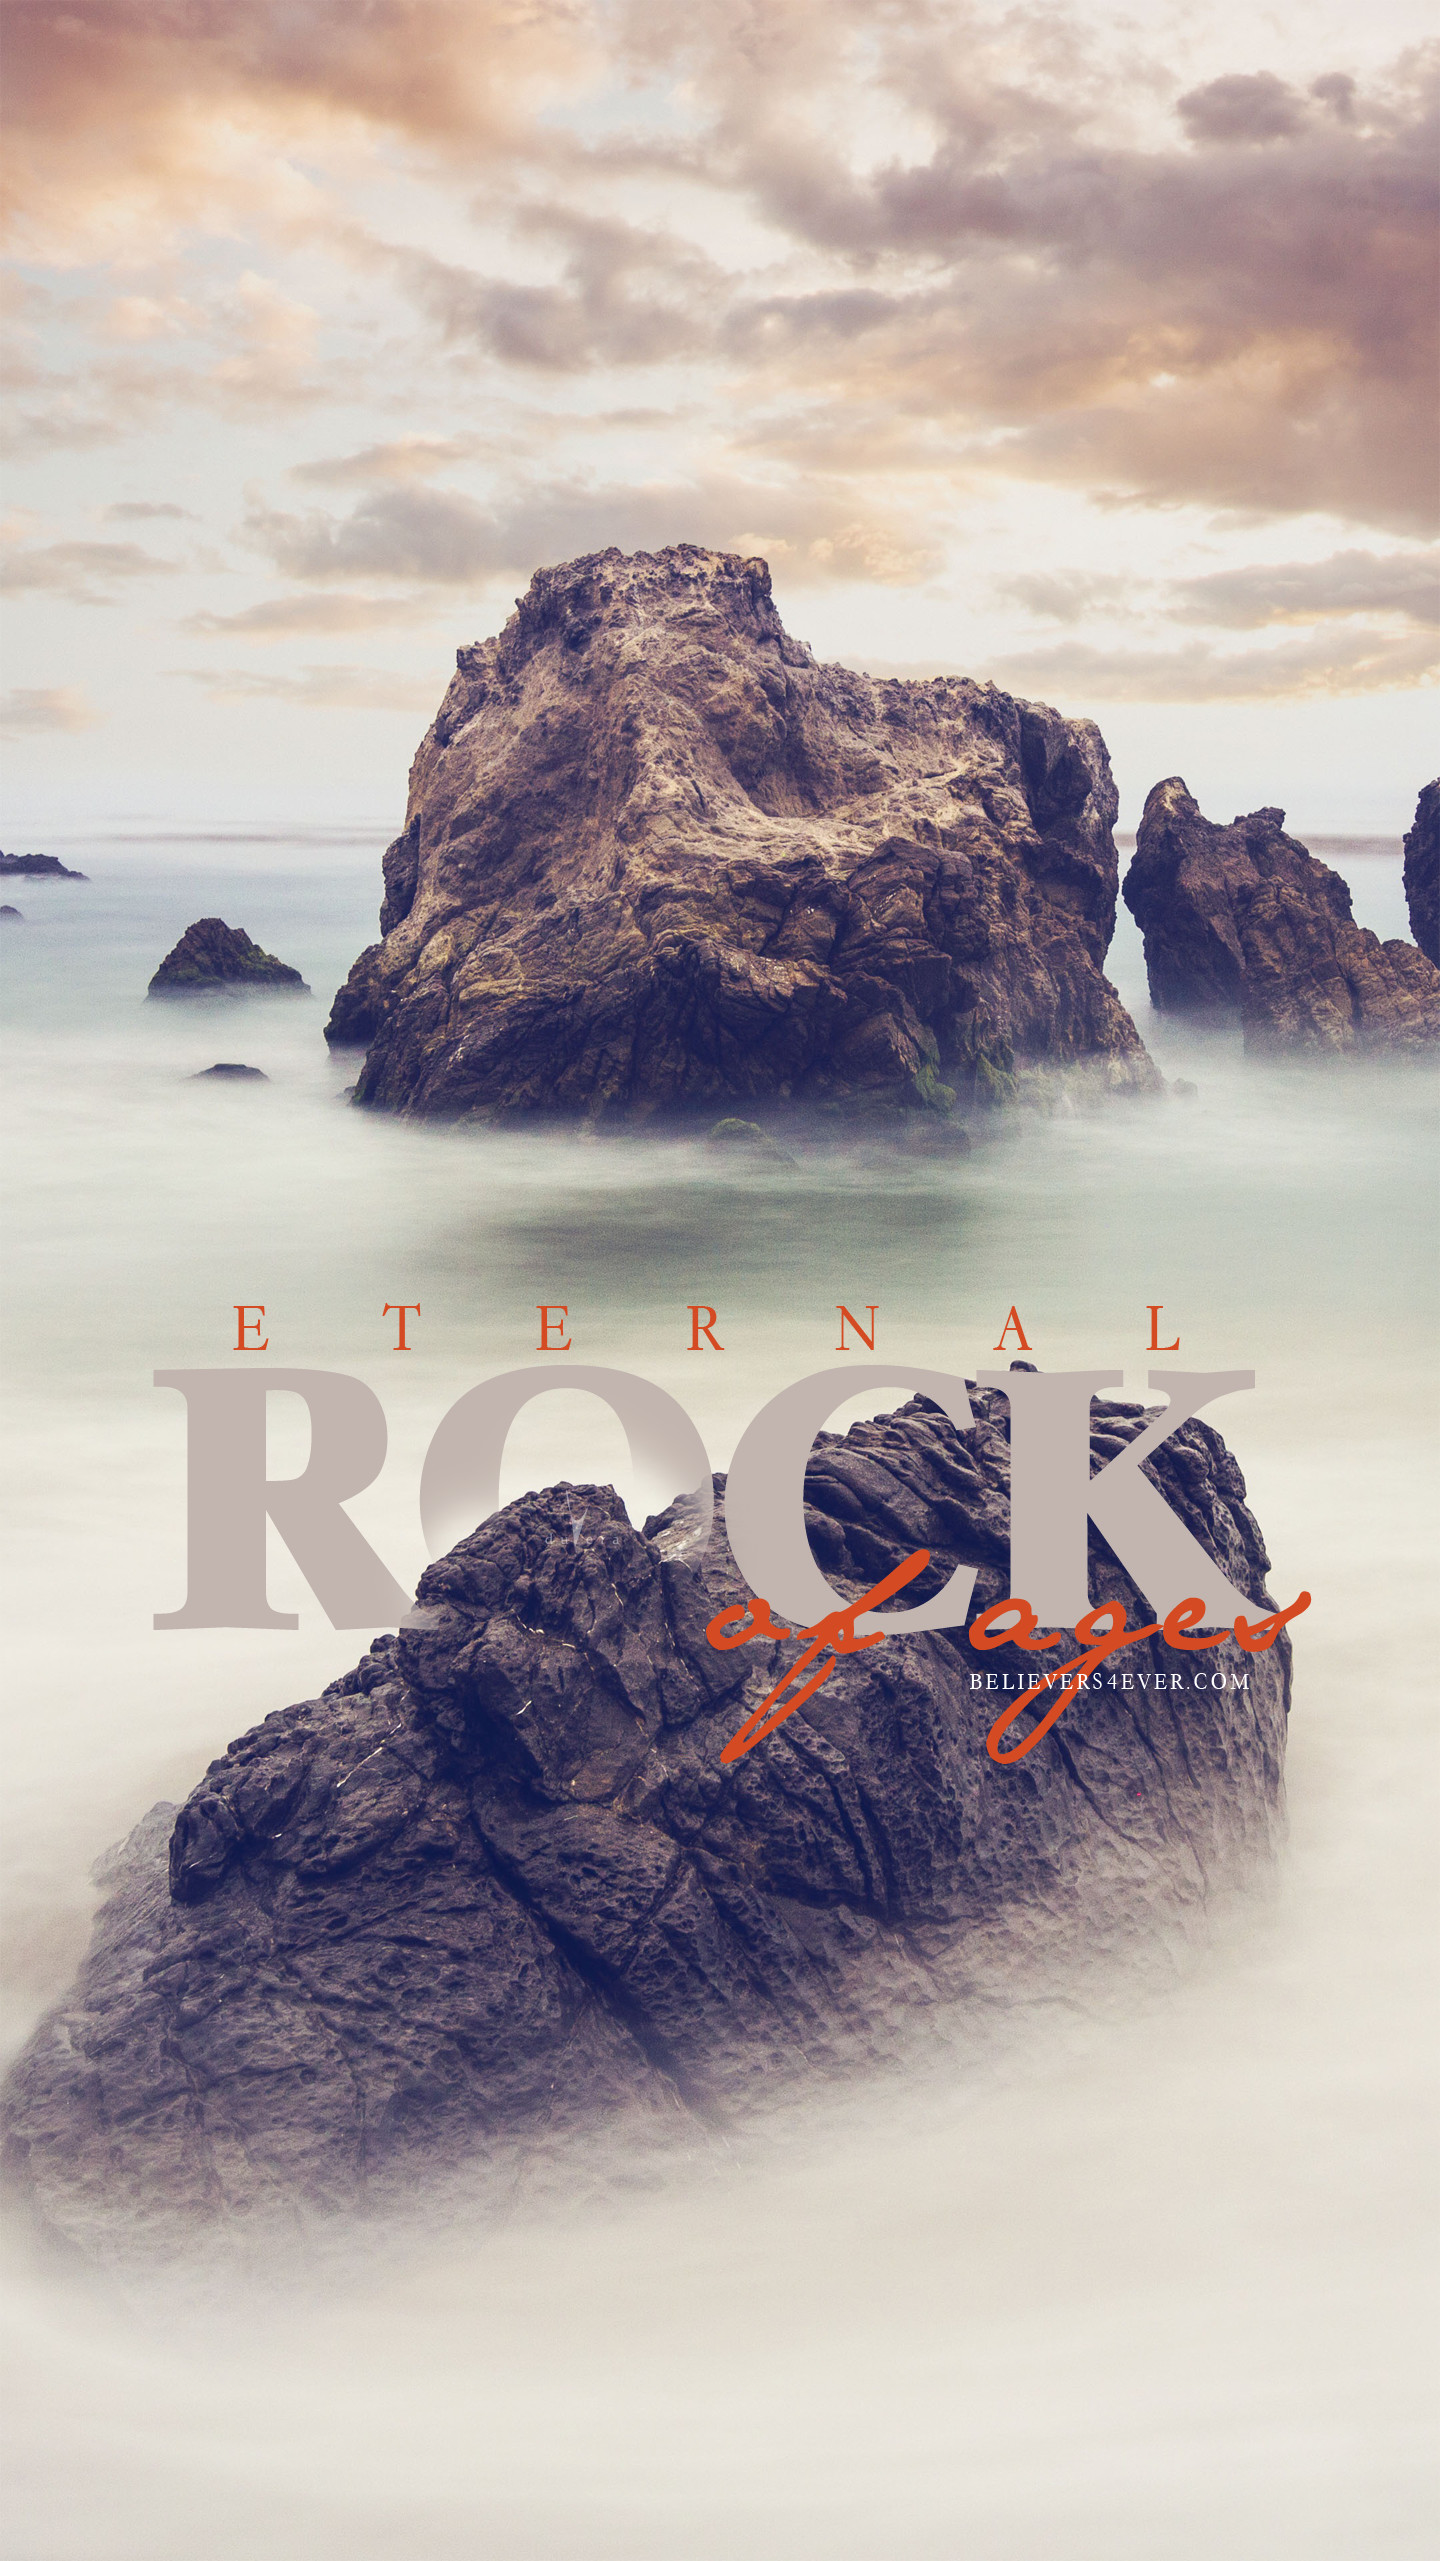 1440x2561 Eternal rock of ages #Christian mobile #phone #wallpaper for android  devices, ipnone